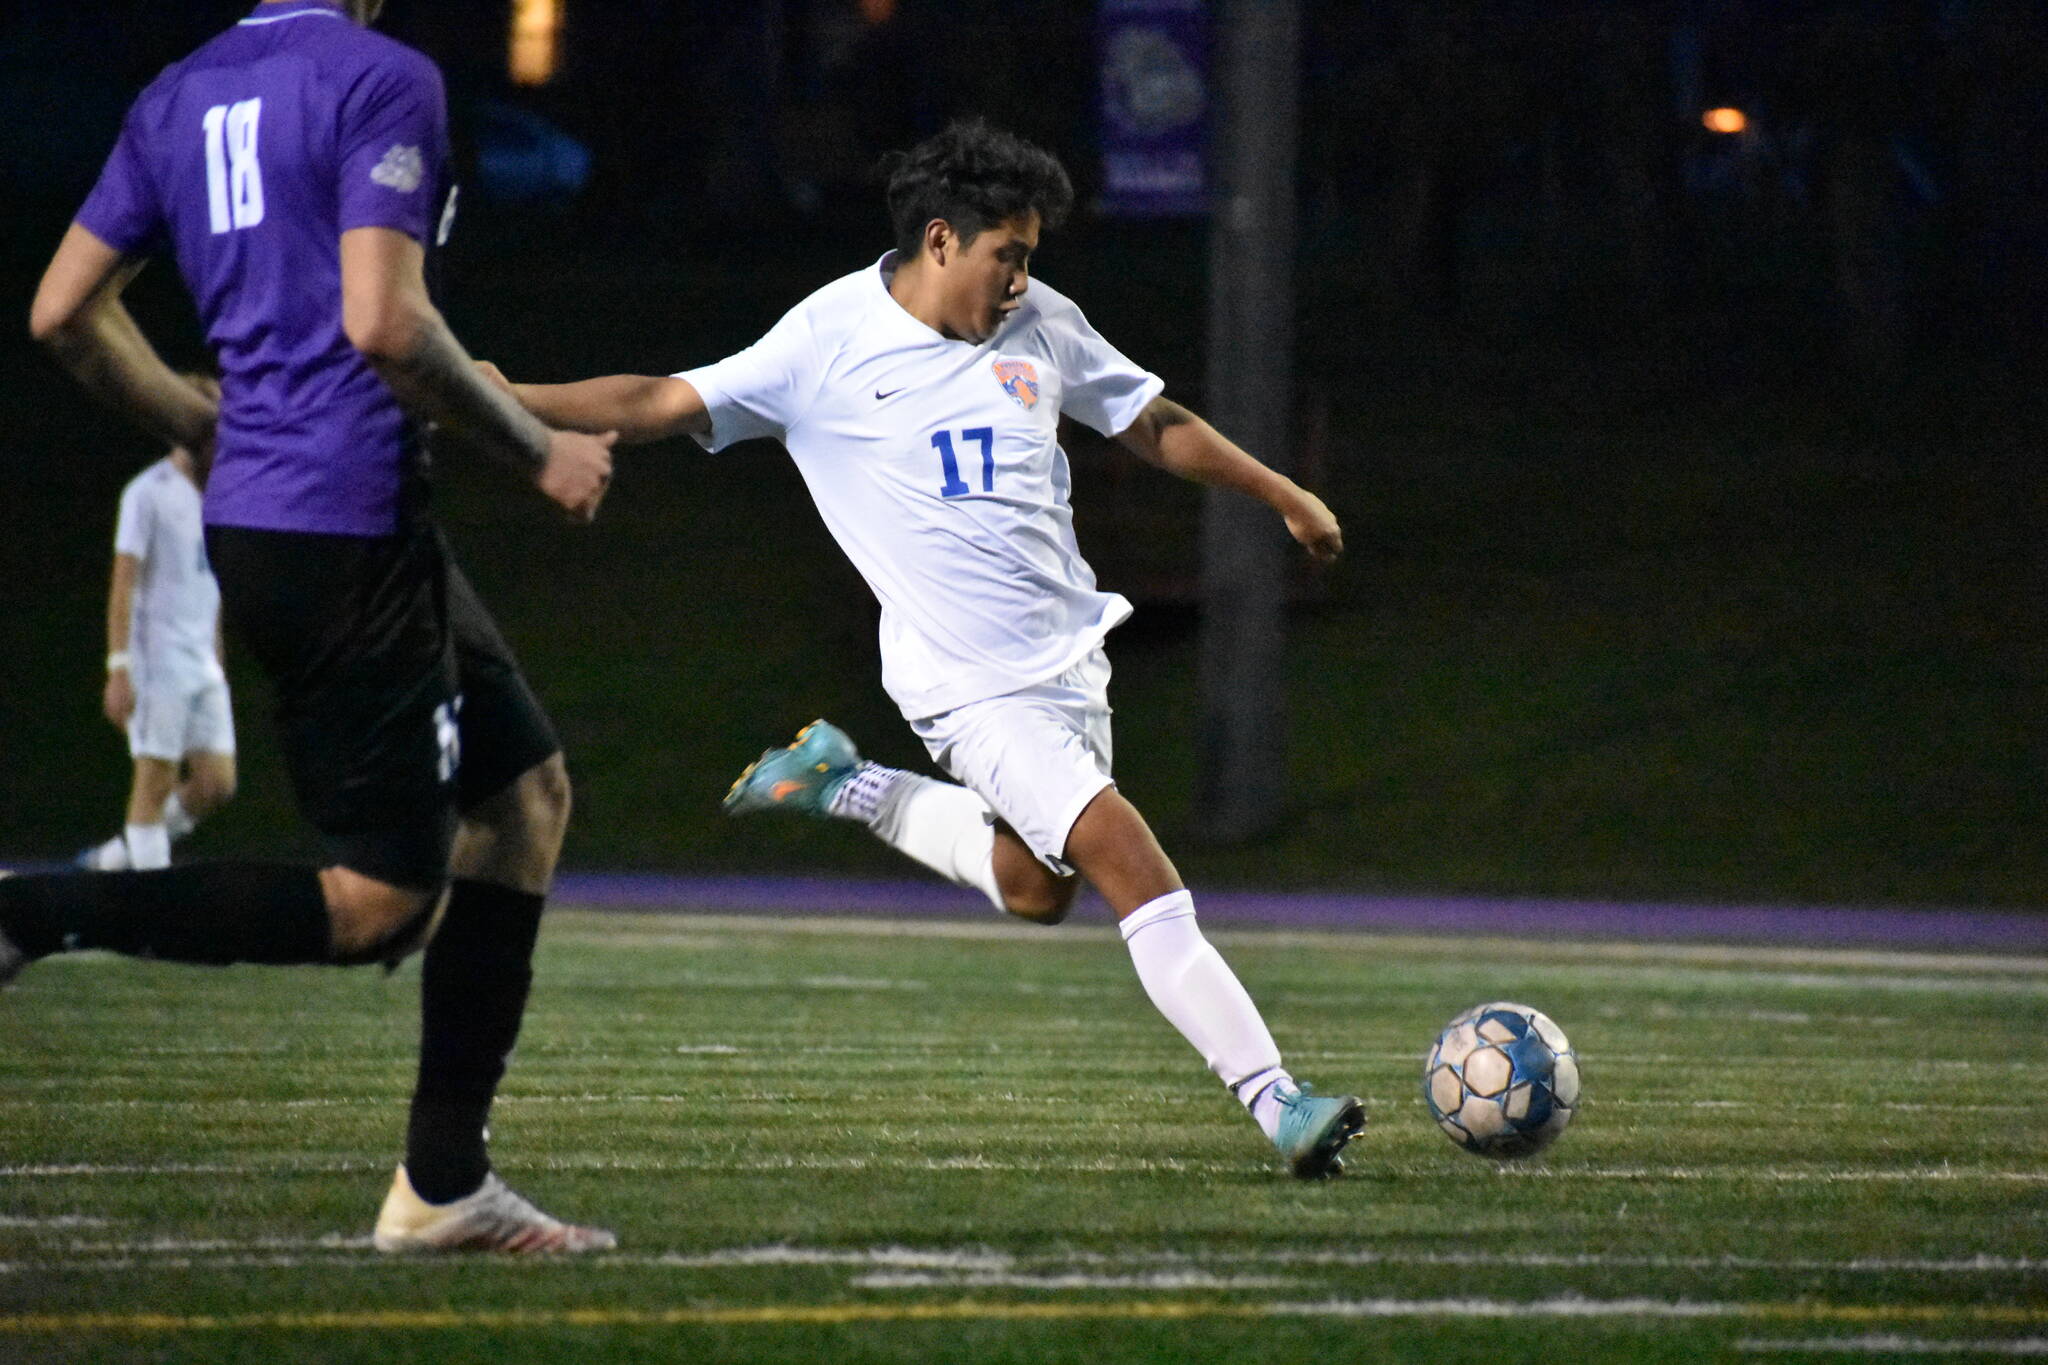 The Auburn Mountainview Lions boys soccer team is back on the right track and has won two games in a row after beating Foster High School, 2-1, in a non-league contest on April 14.